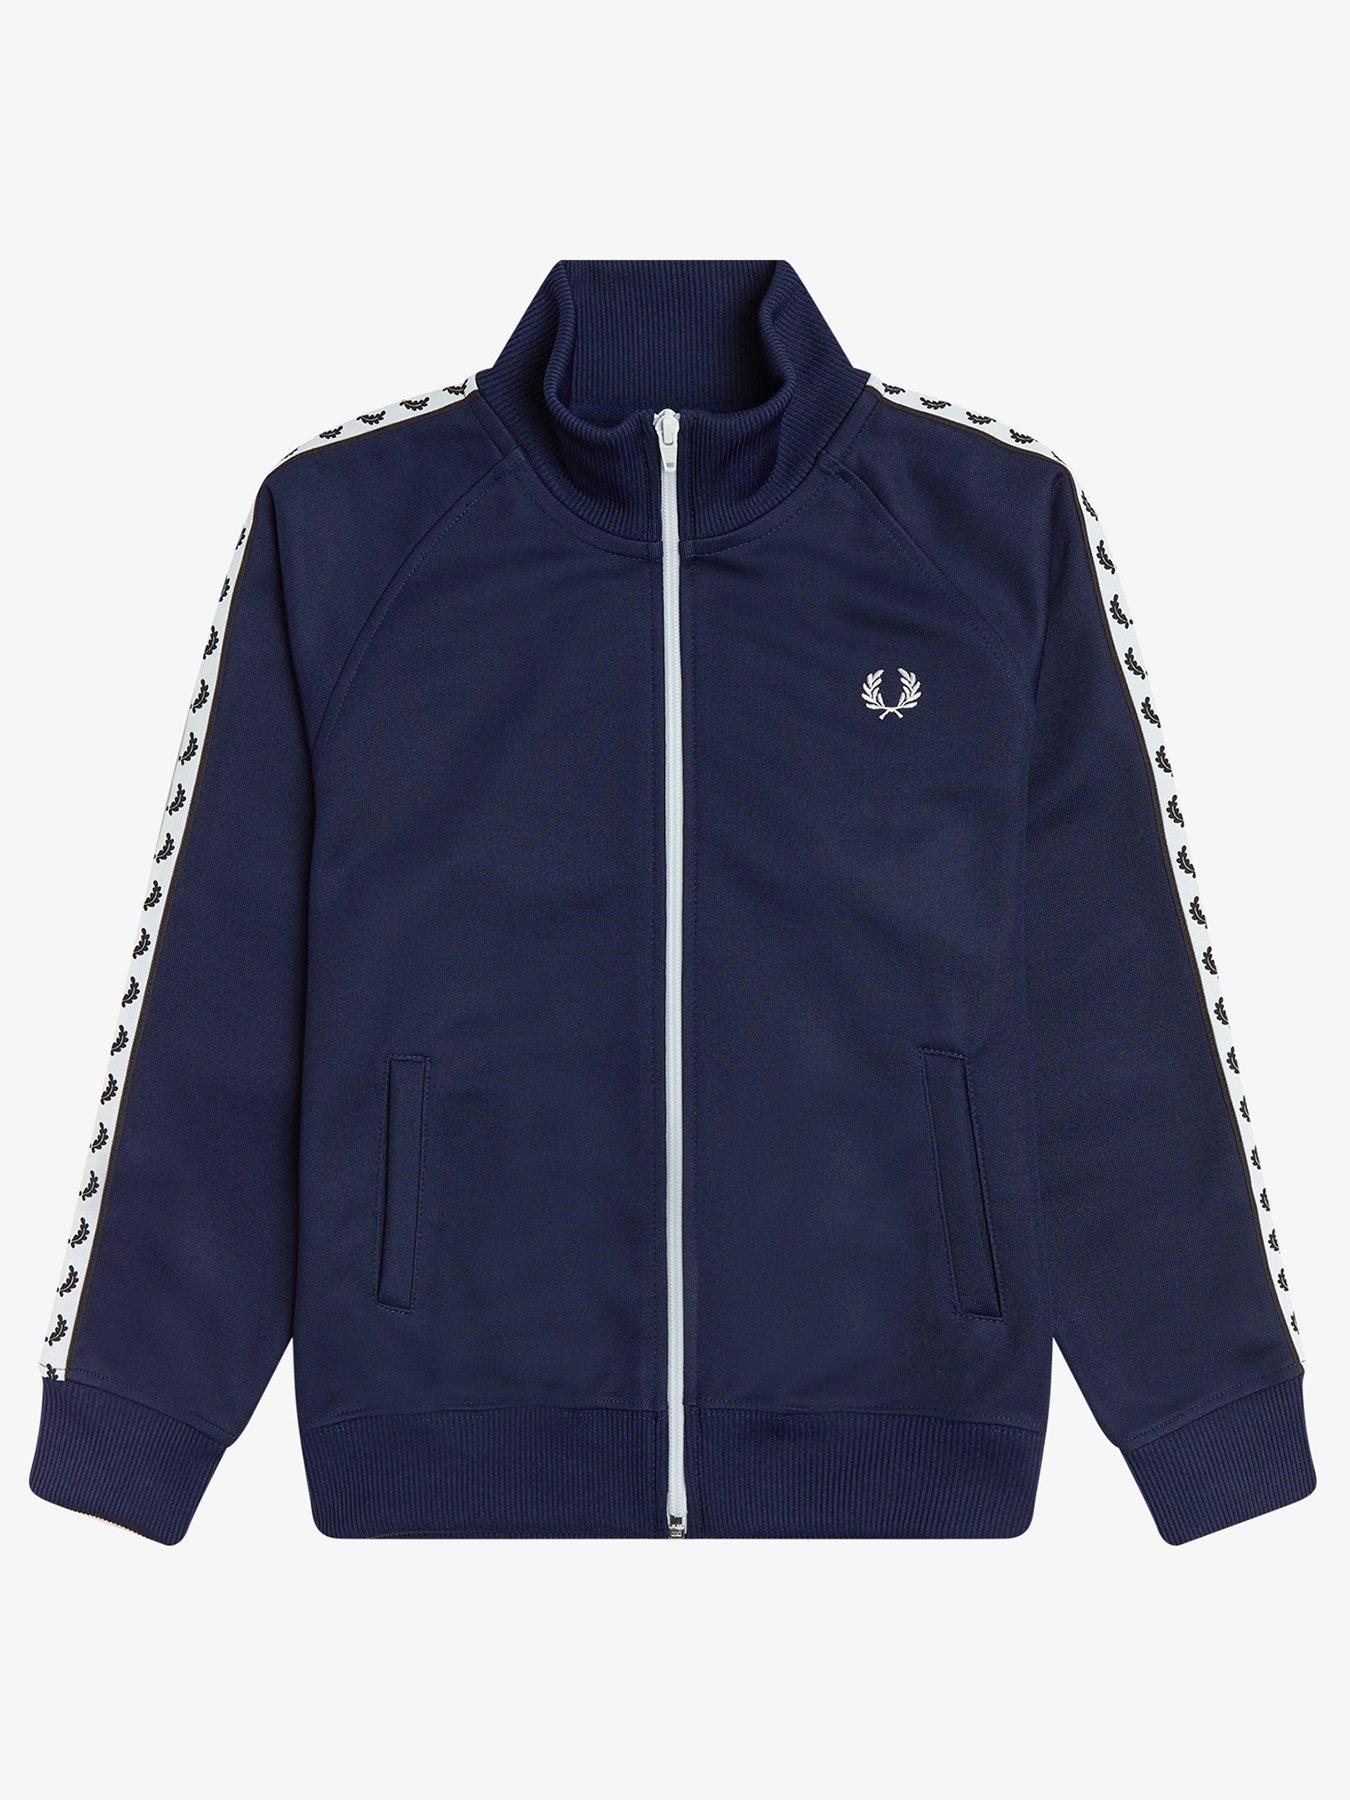 Boys Clothes Boys Taped Track Jacket - Carbon Blue